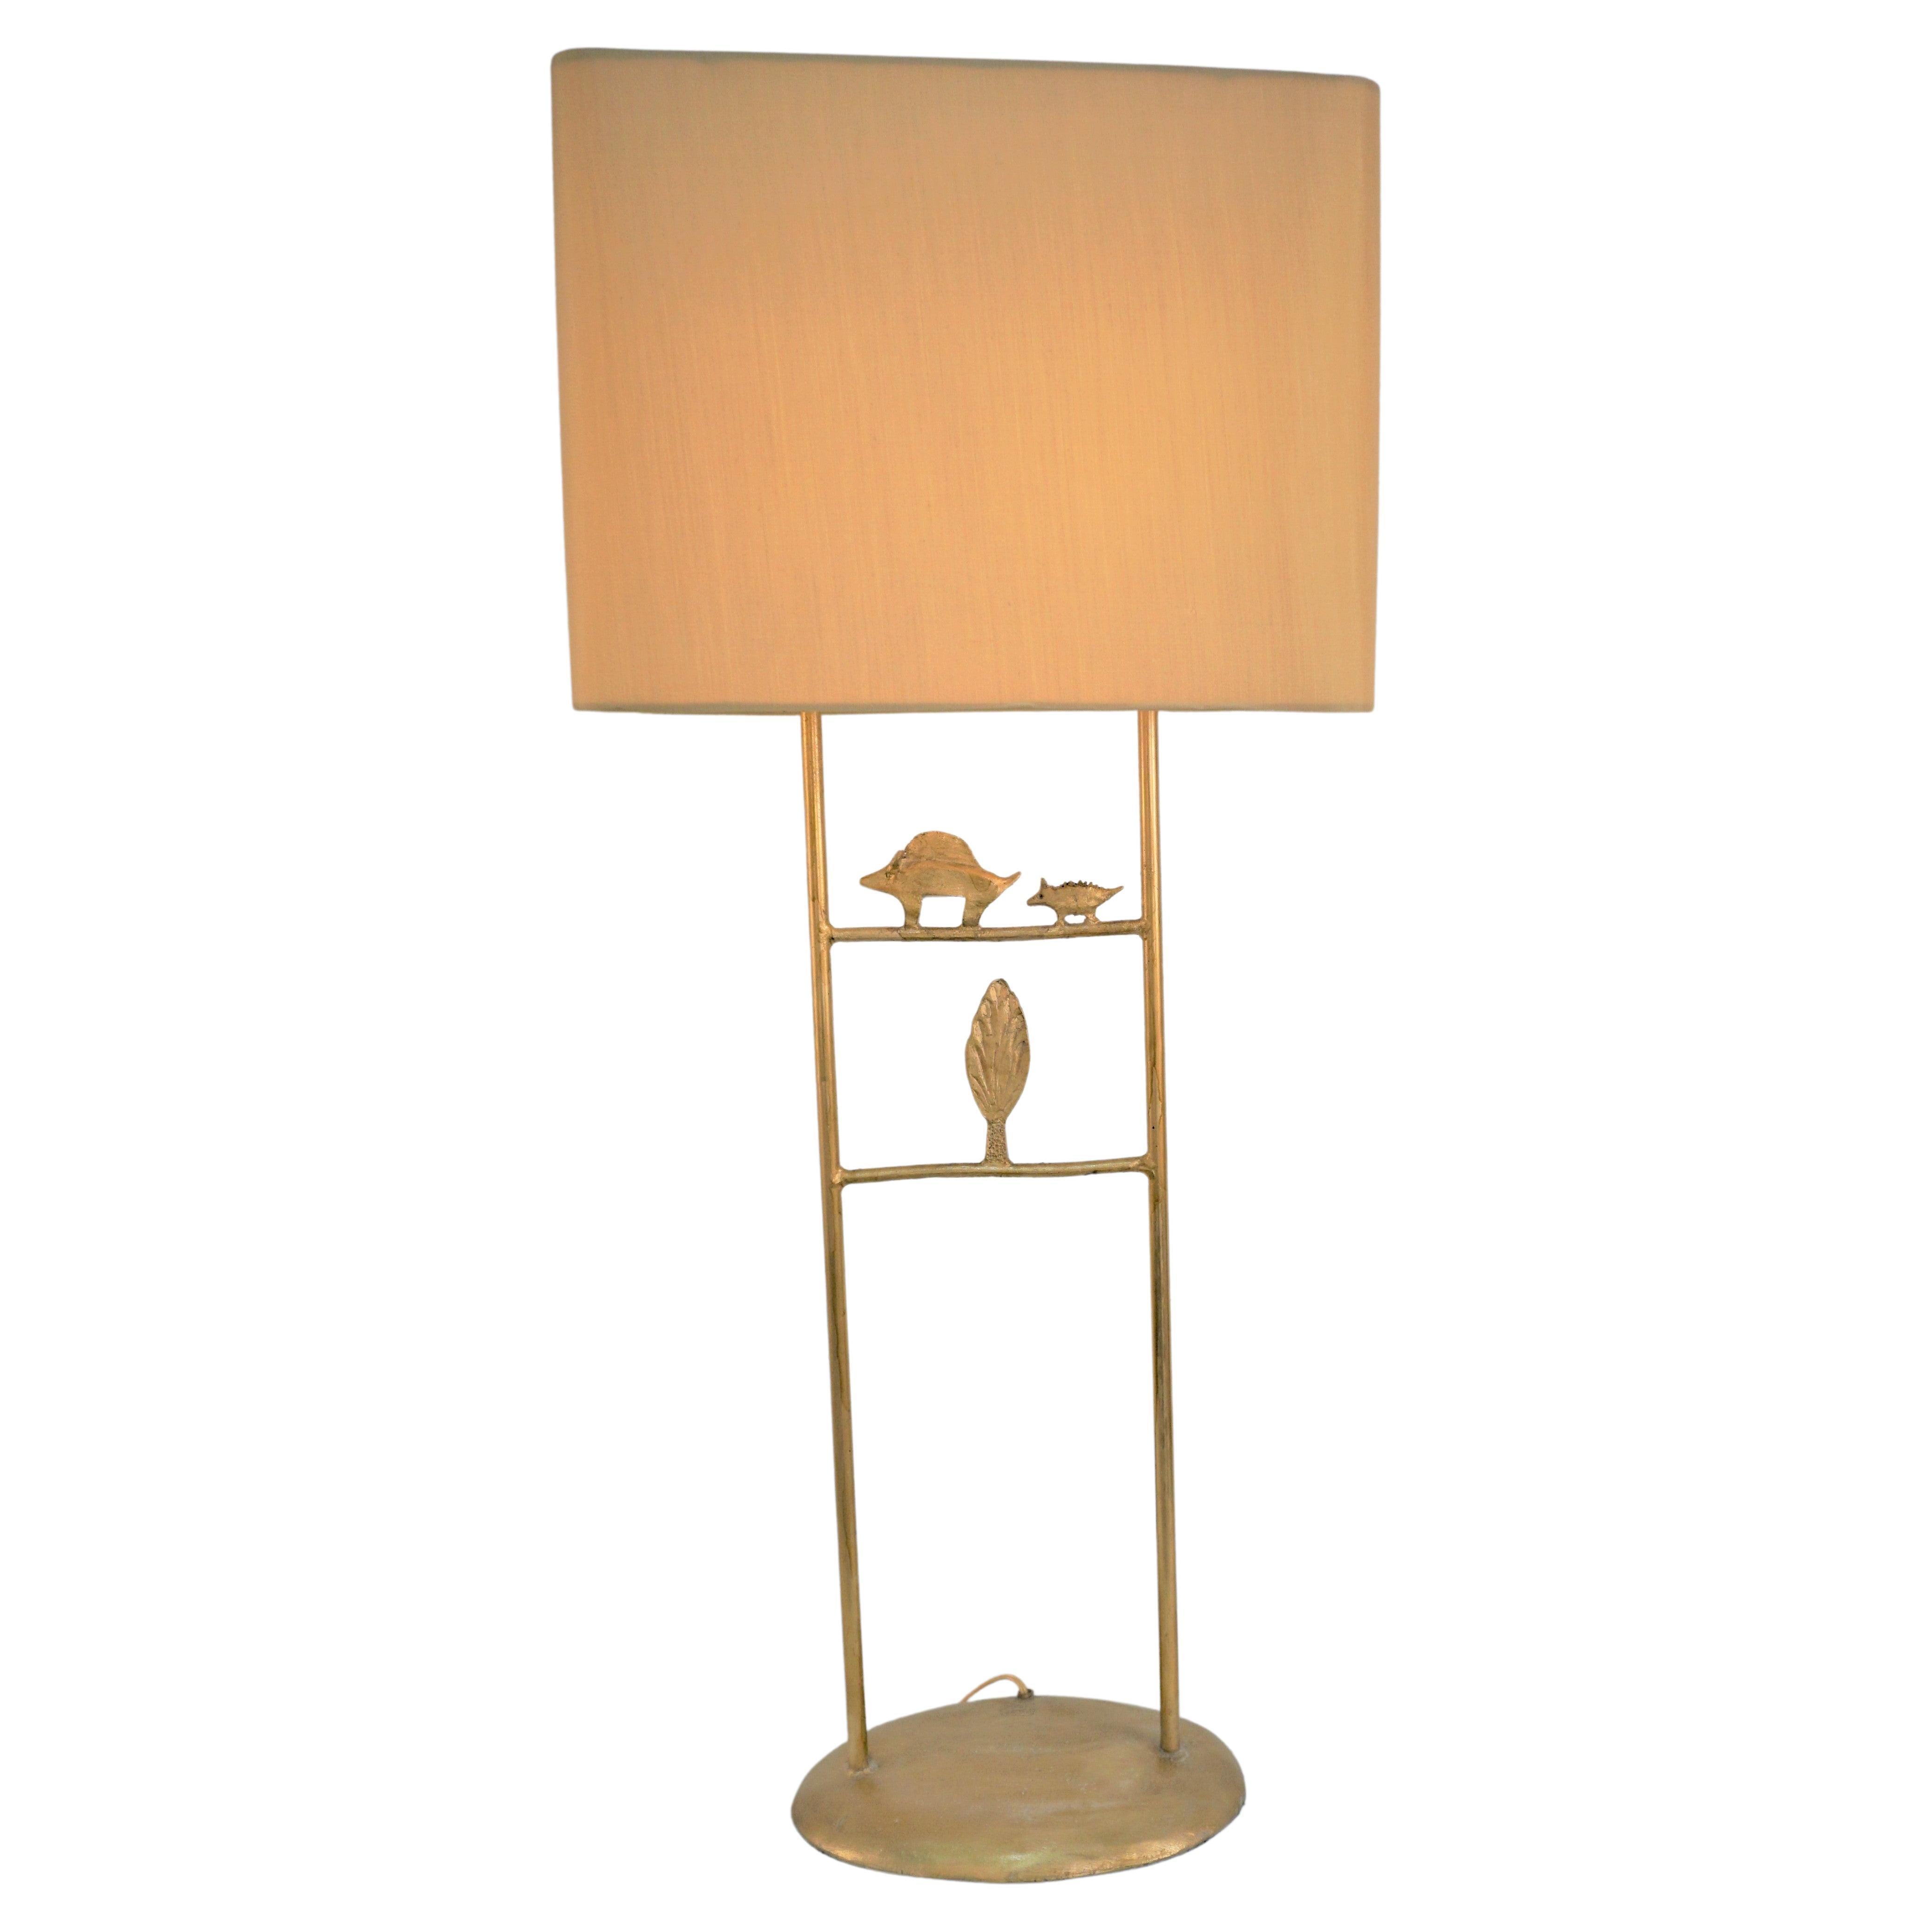 Pierre Casenove for Fondica Gilt Metal 1990 Table Lamp For Sale